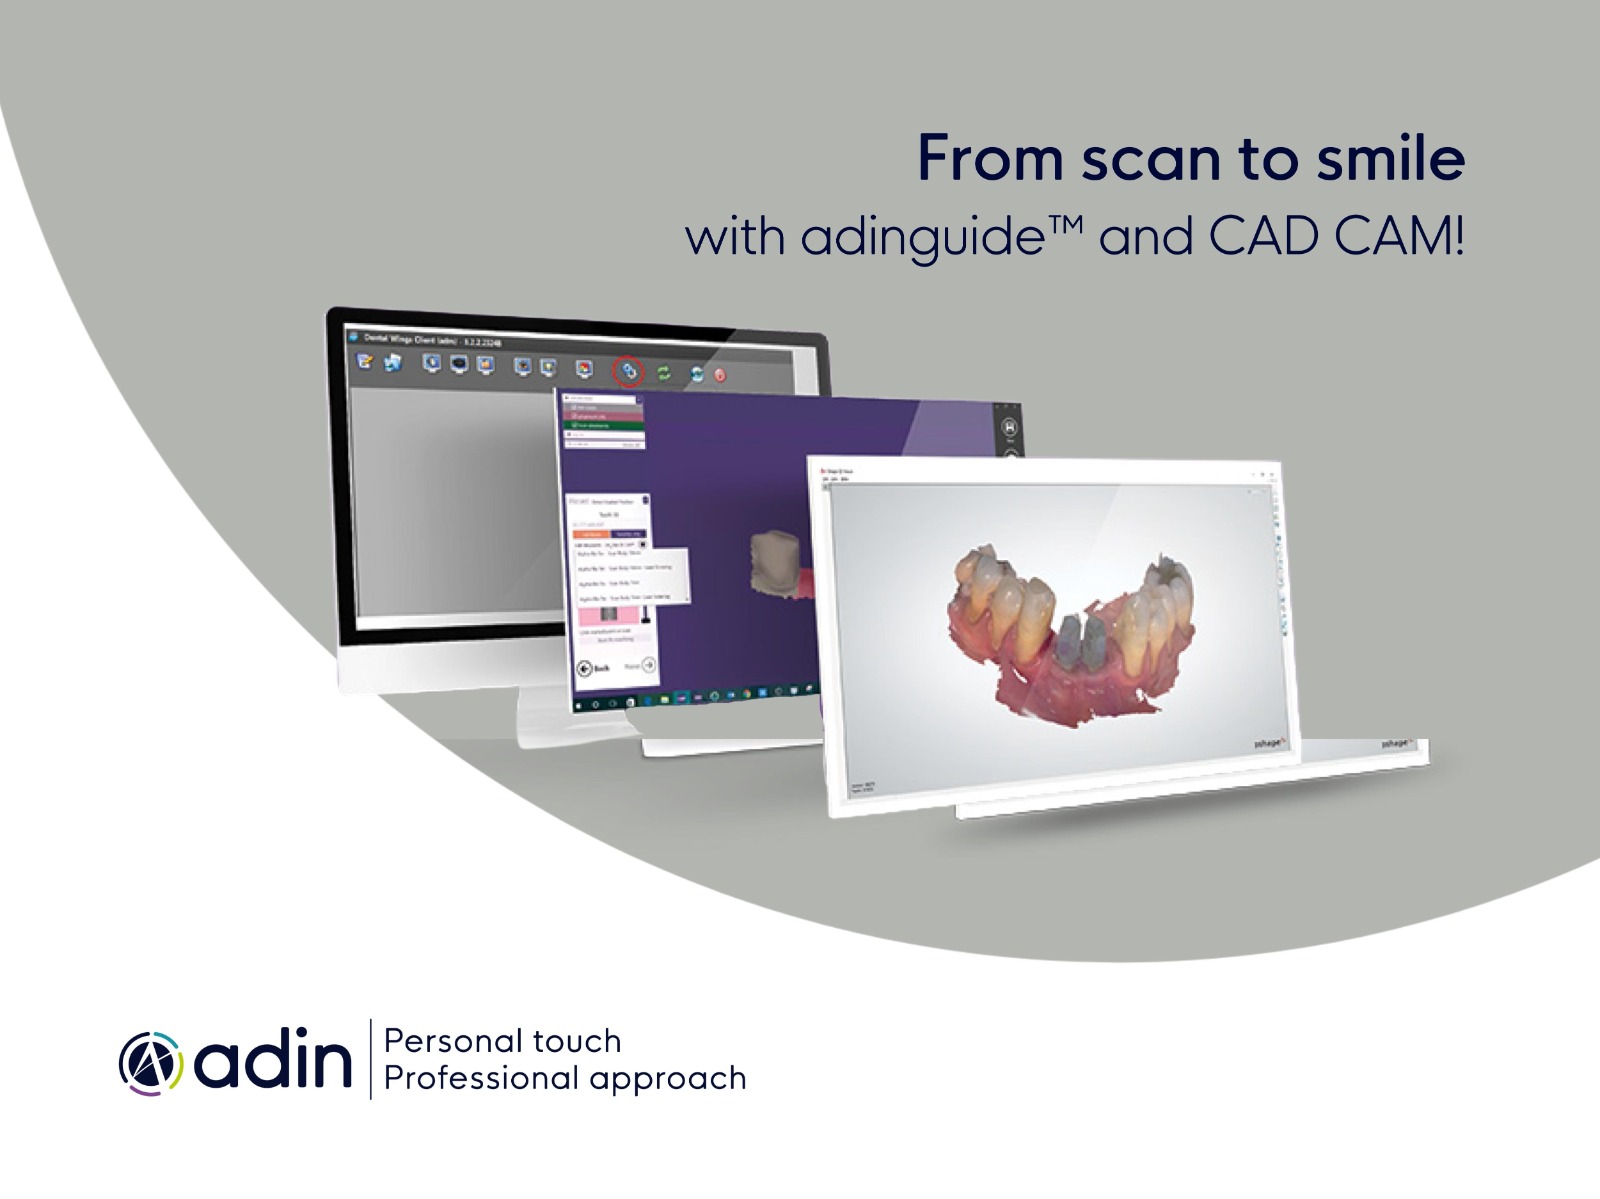 From scan to smile with adinguide™ and cad cam